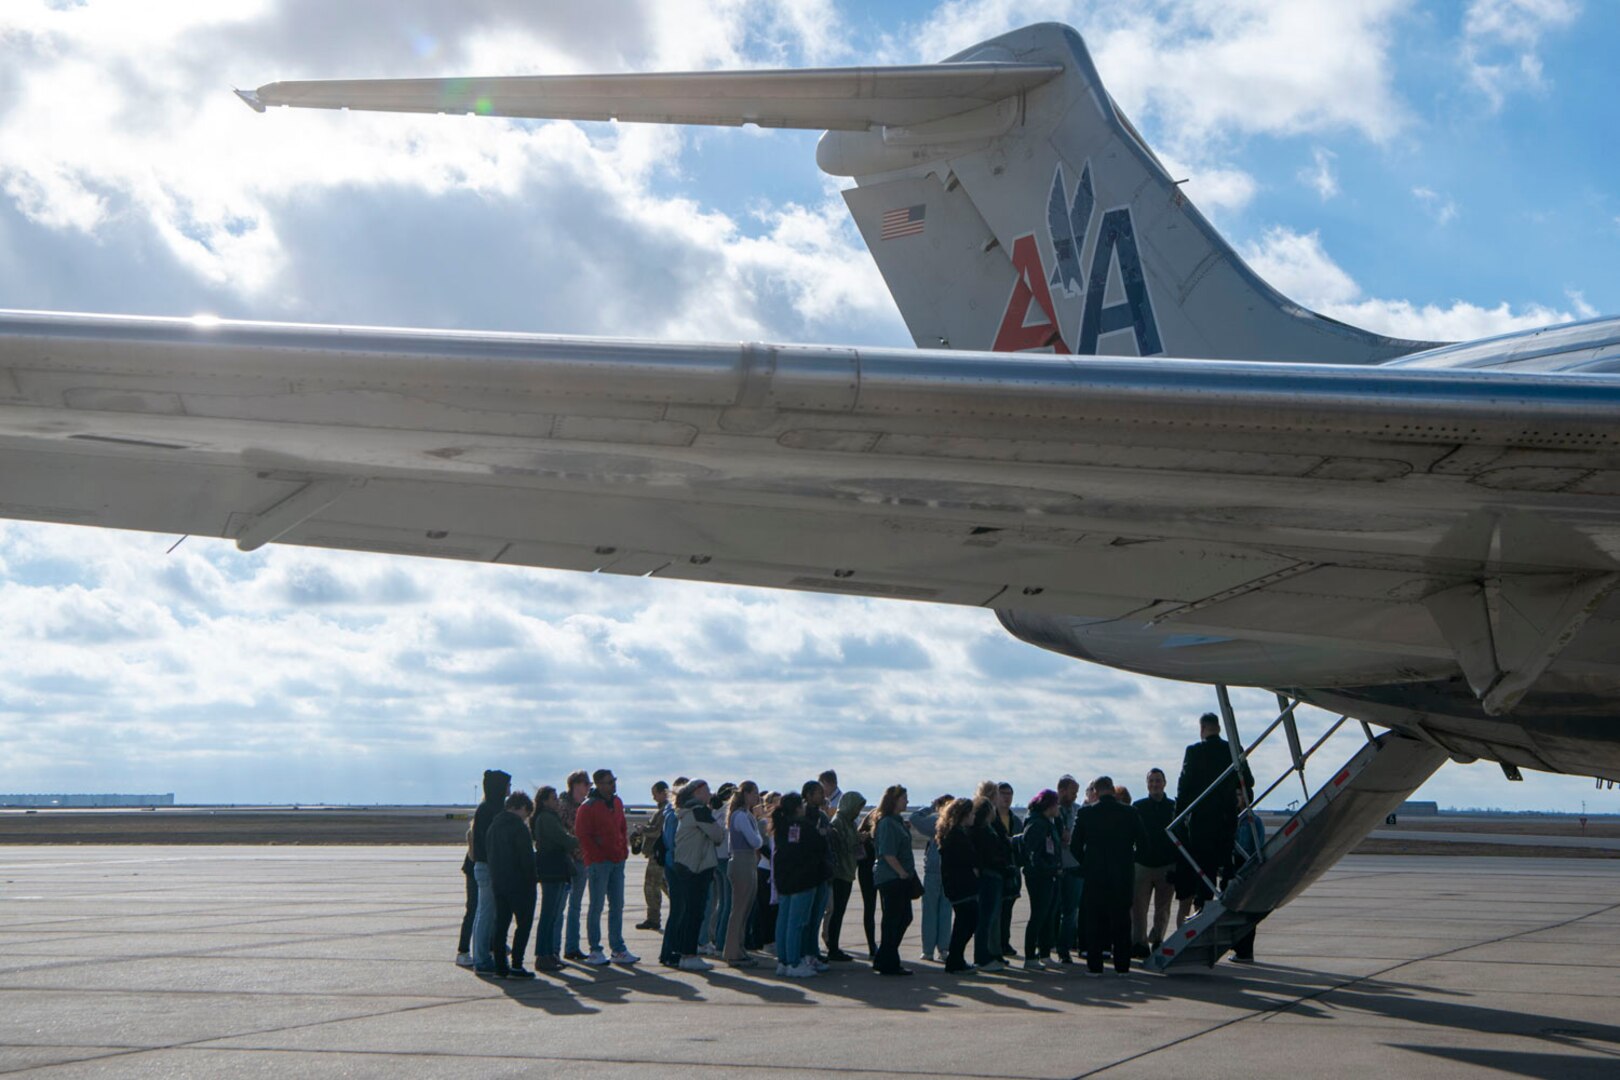 a group of high school students gather near an aircraft tail